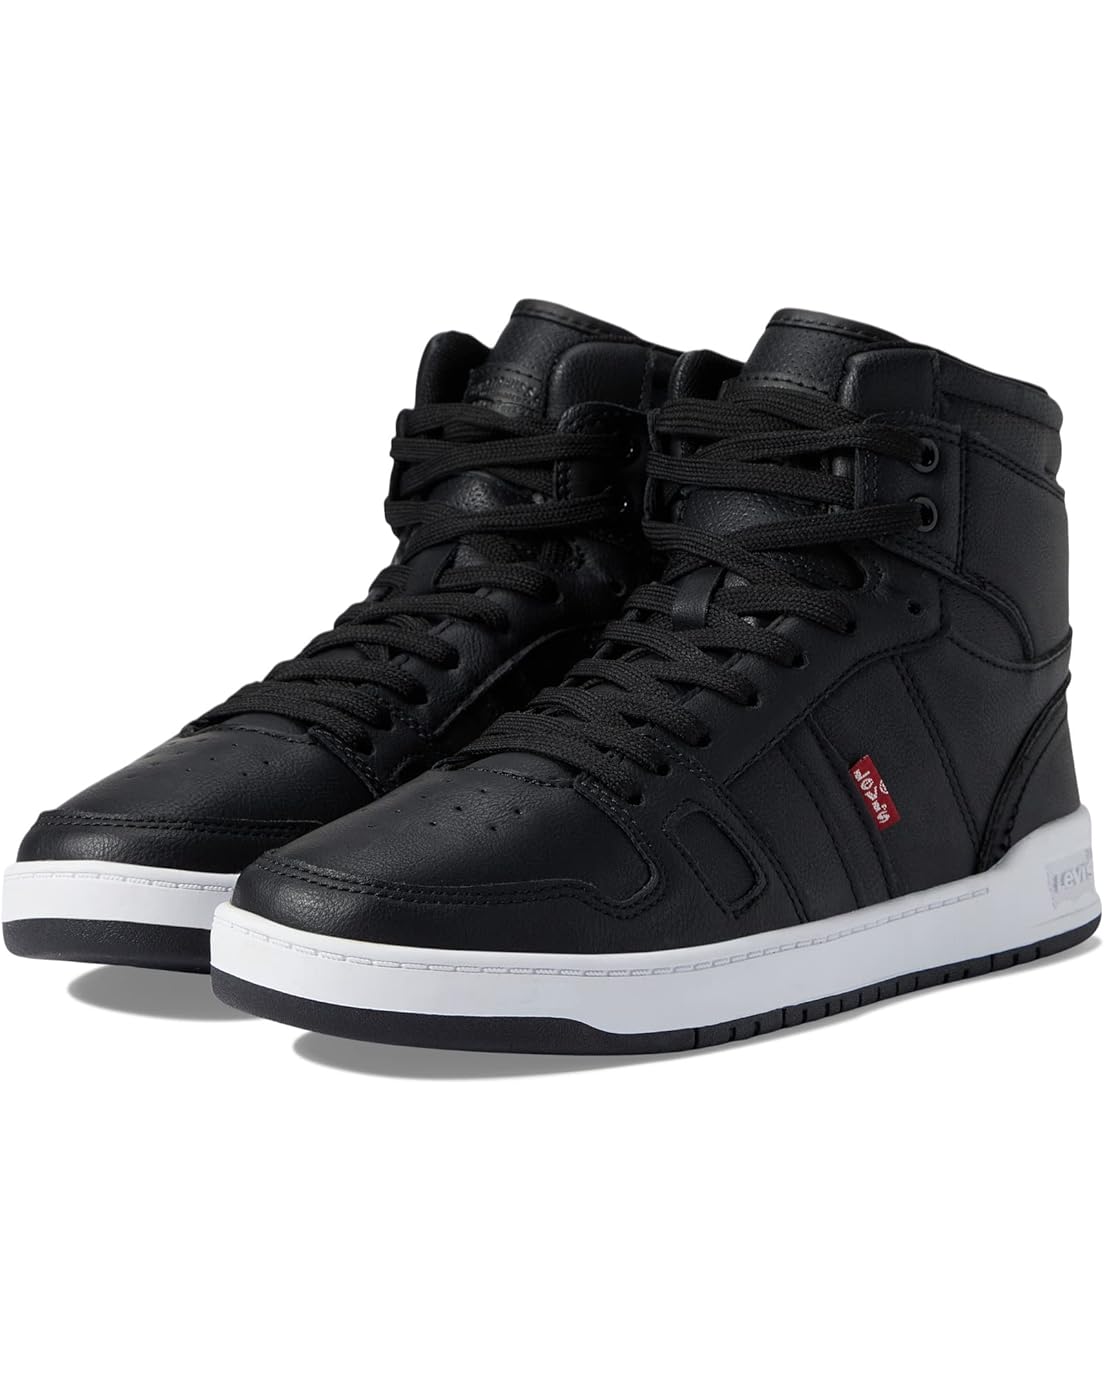 Levis Shoes Basketball Hi Perforated Ultra